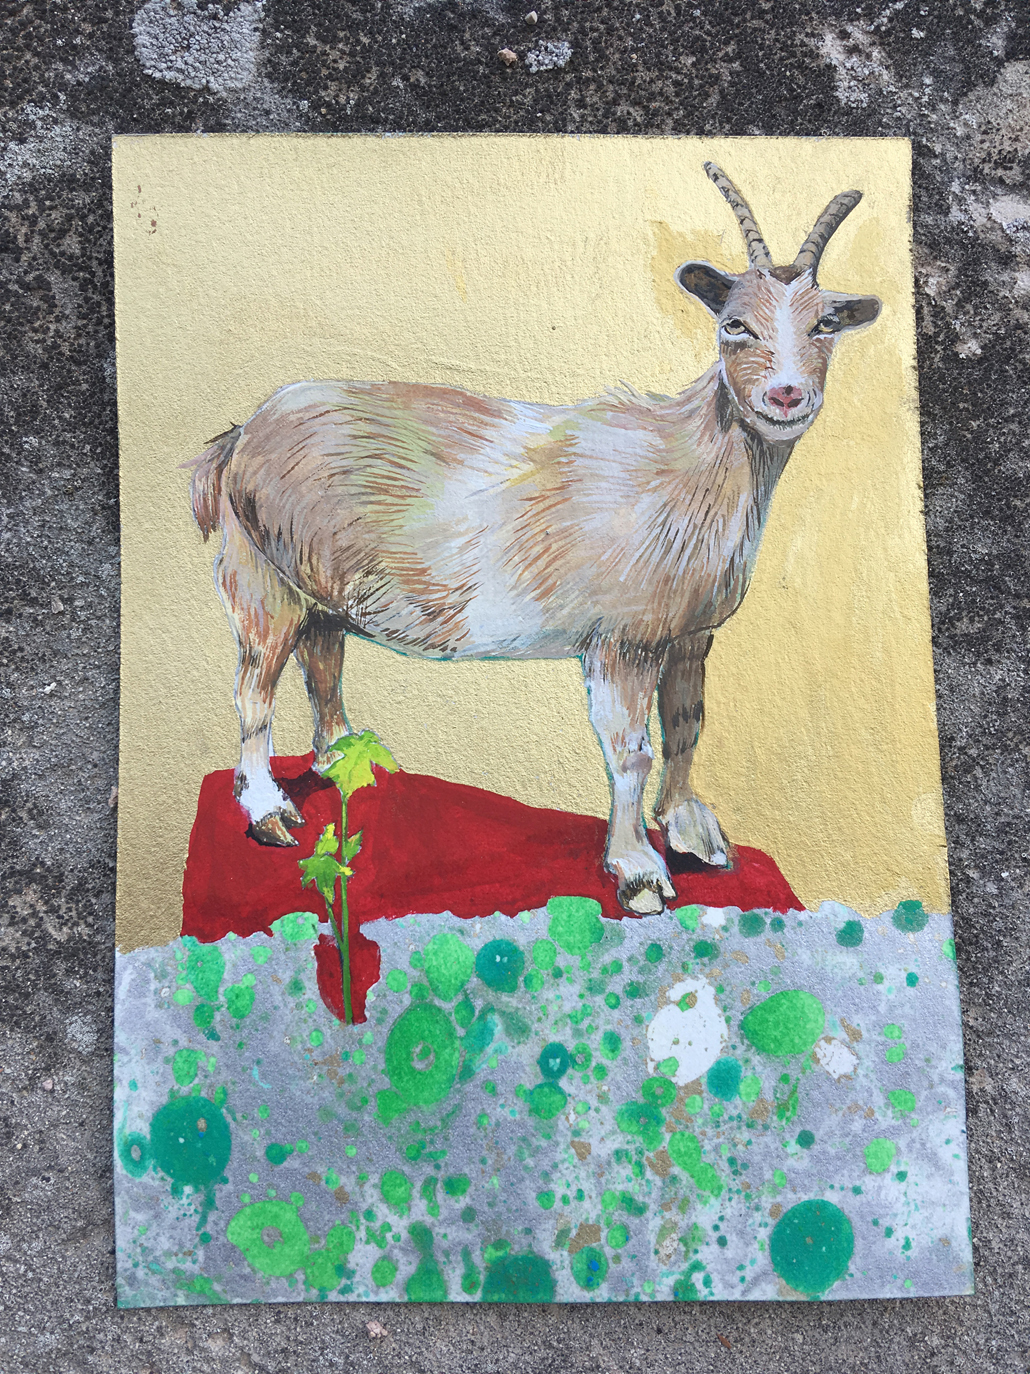  Zoe the Goat" Gouache Oil and Litho on paper, 5.5 in W x 8 in H  